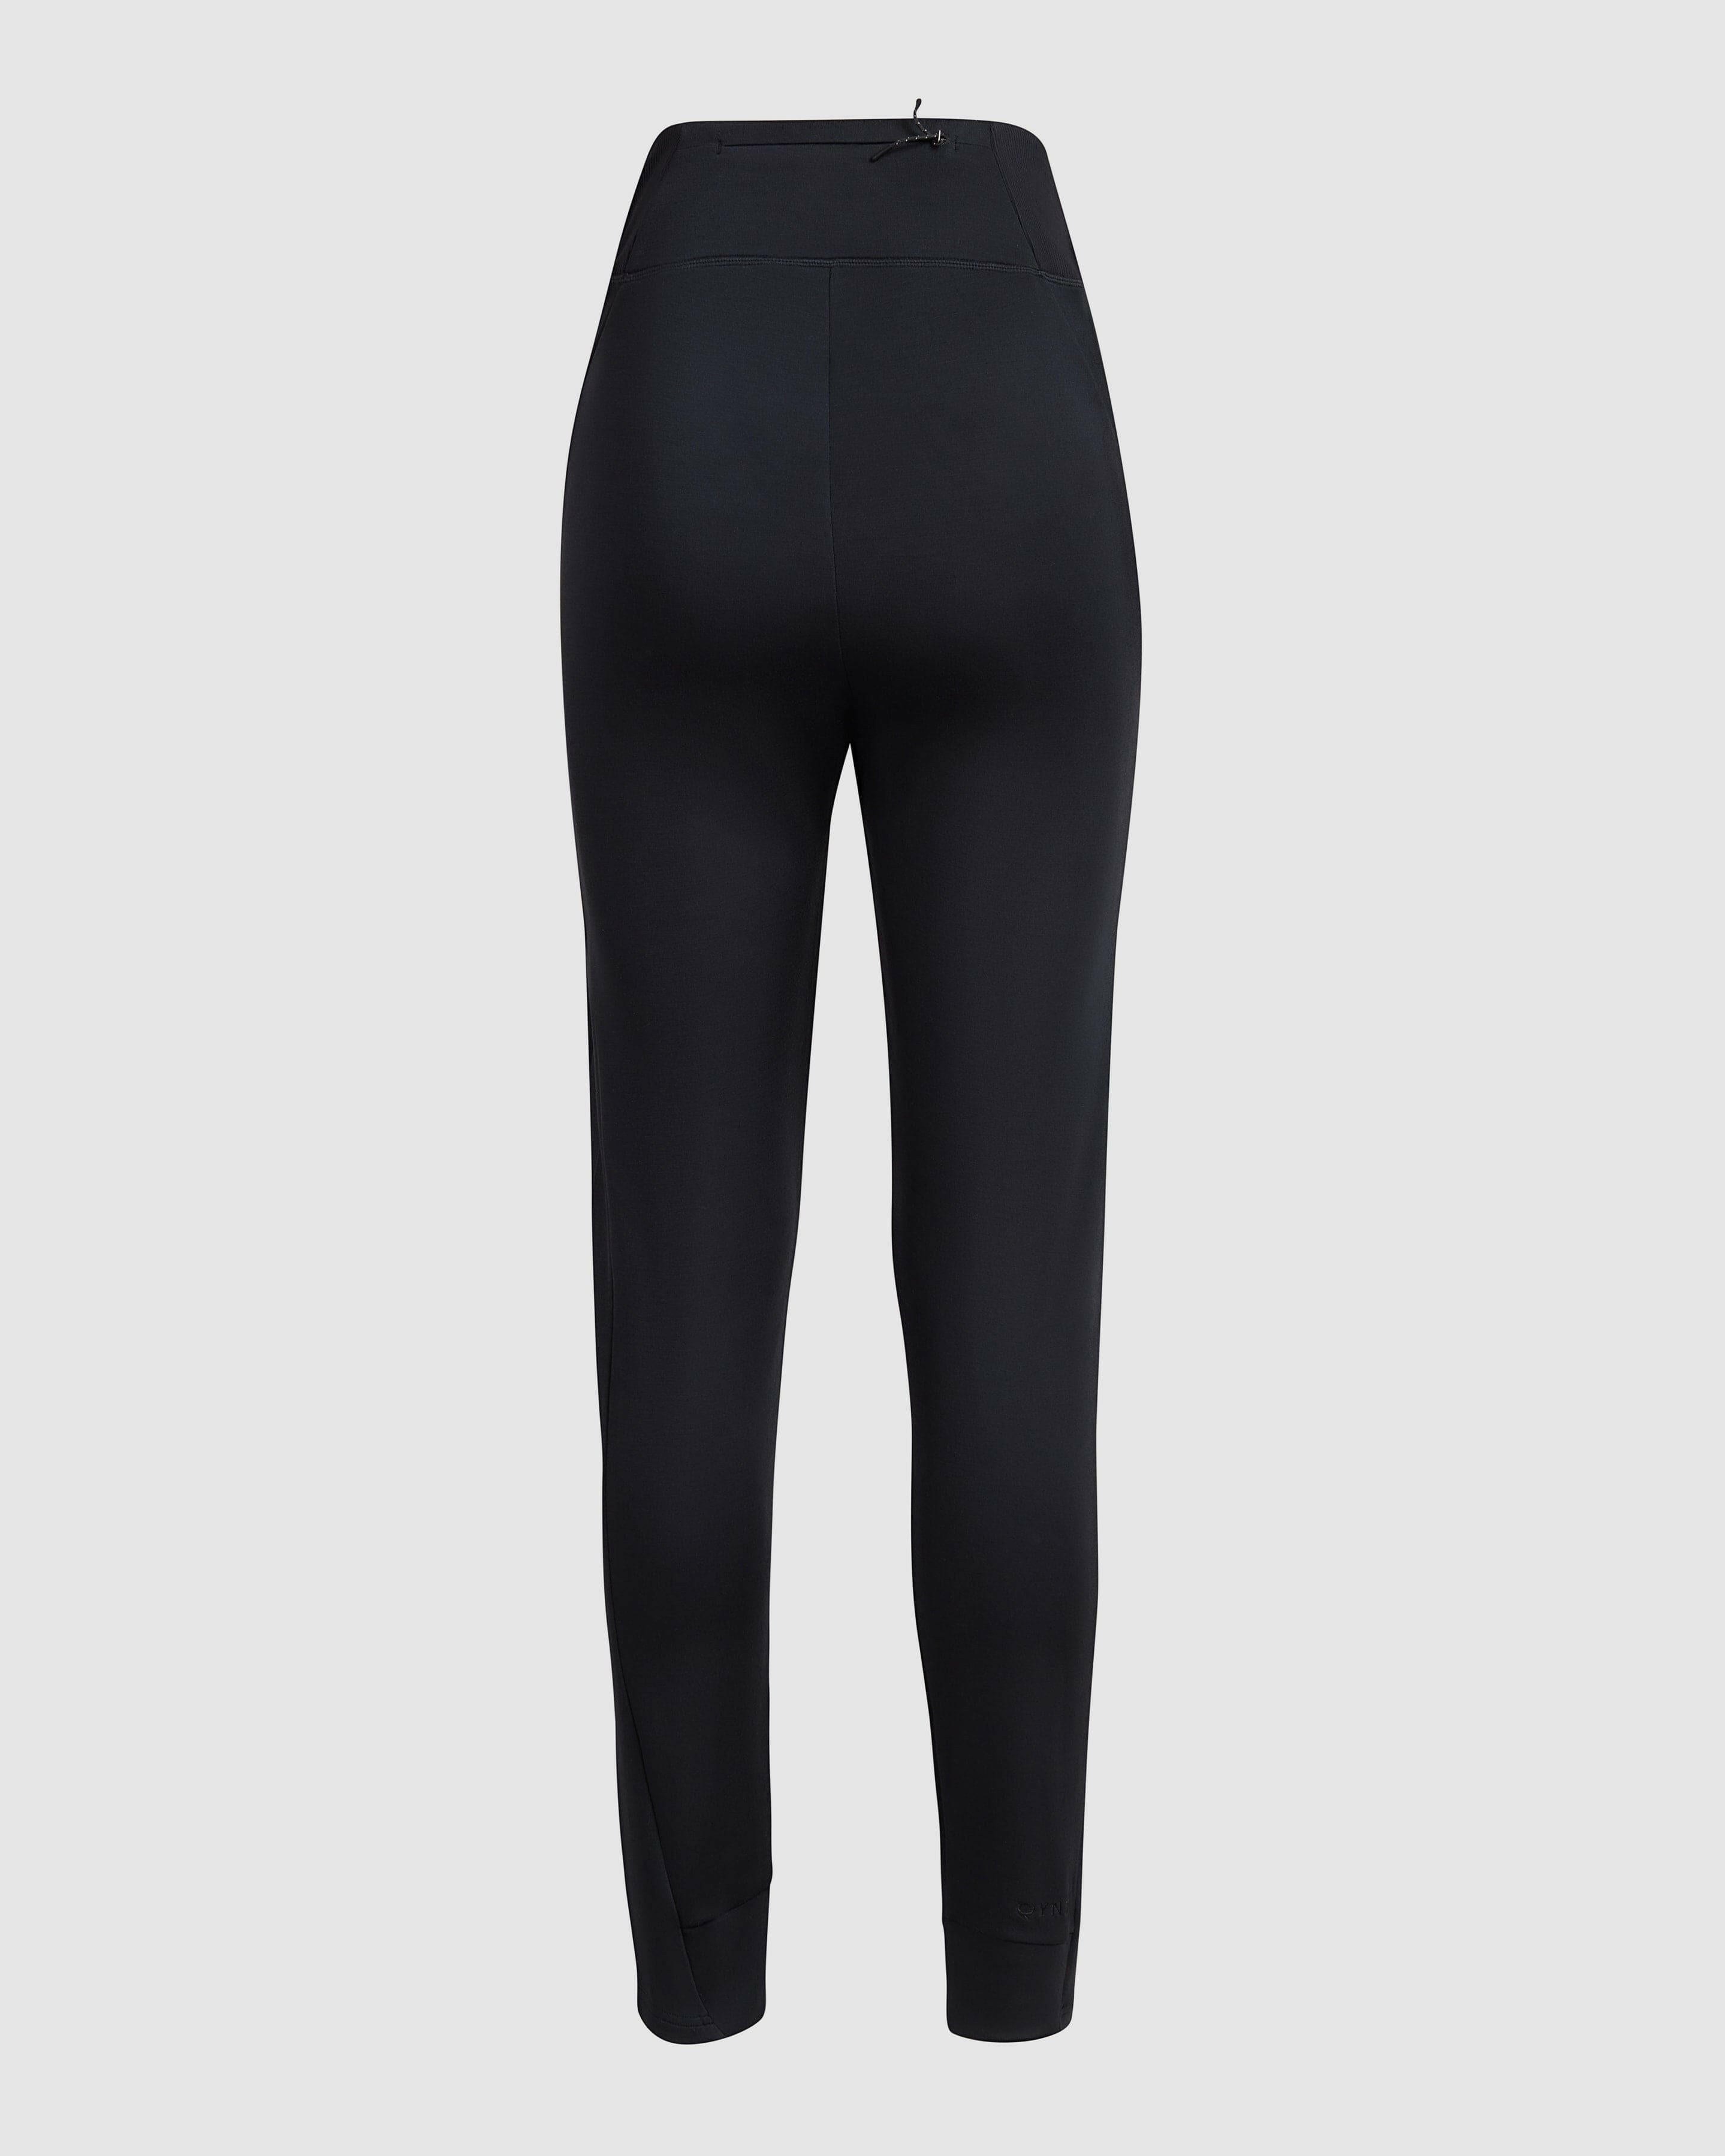 Classic black Modest JOG JOGGER by Qynda in light fabric on a white background.